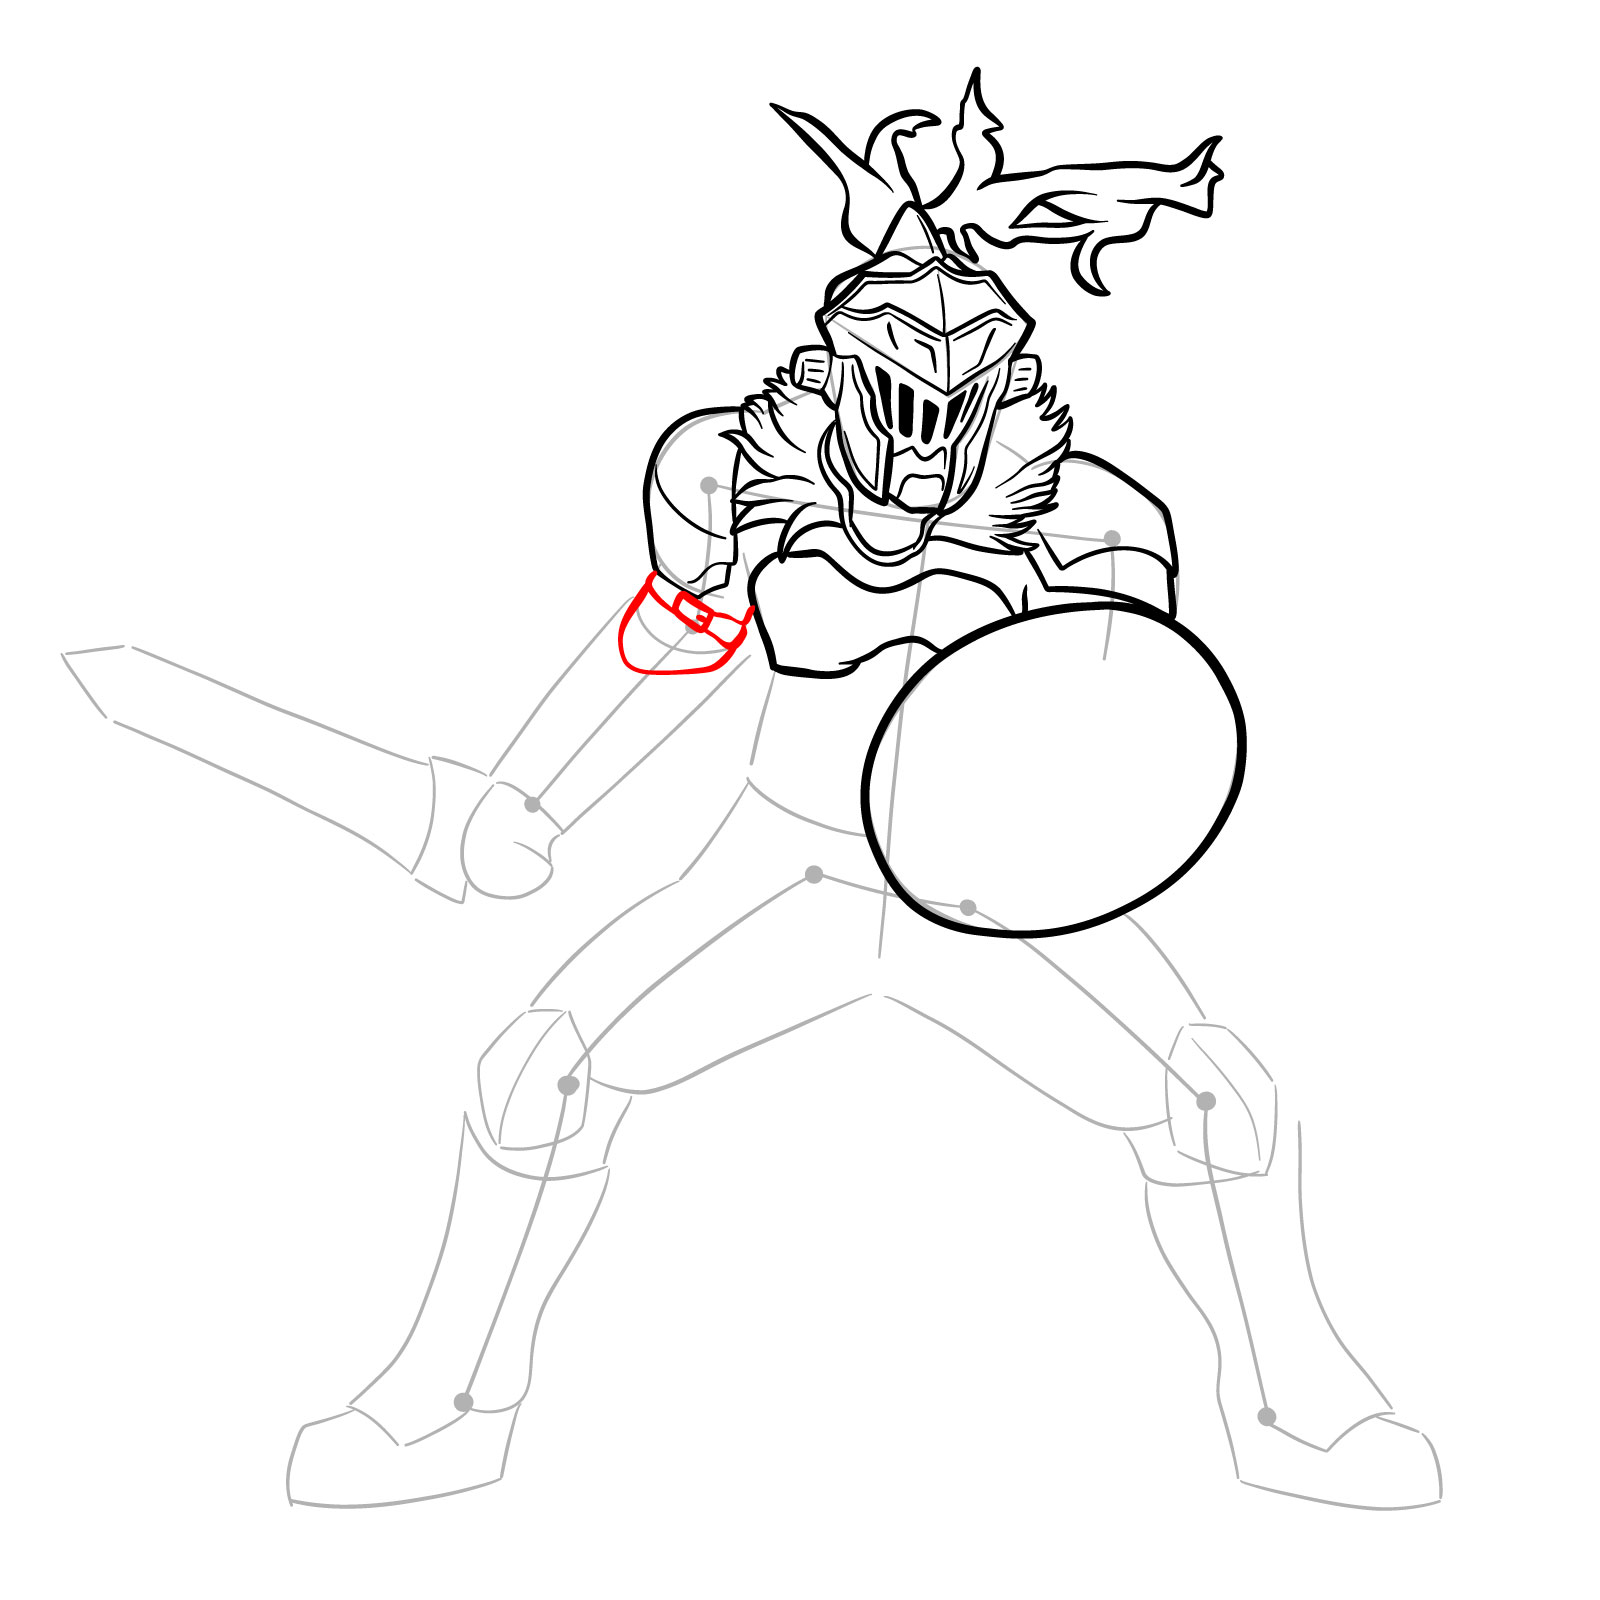 How to Draw Goblin Slayer in battle stance - step 18